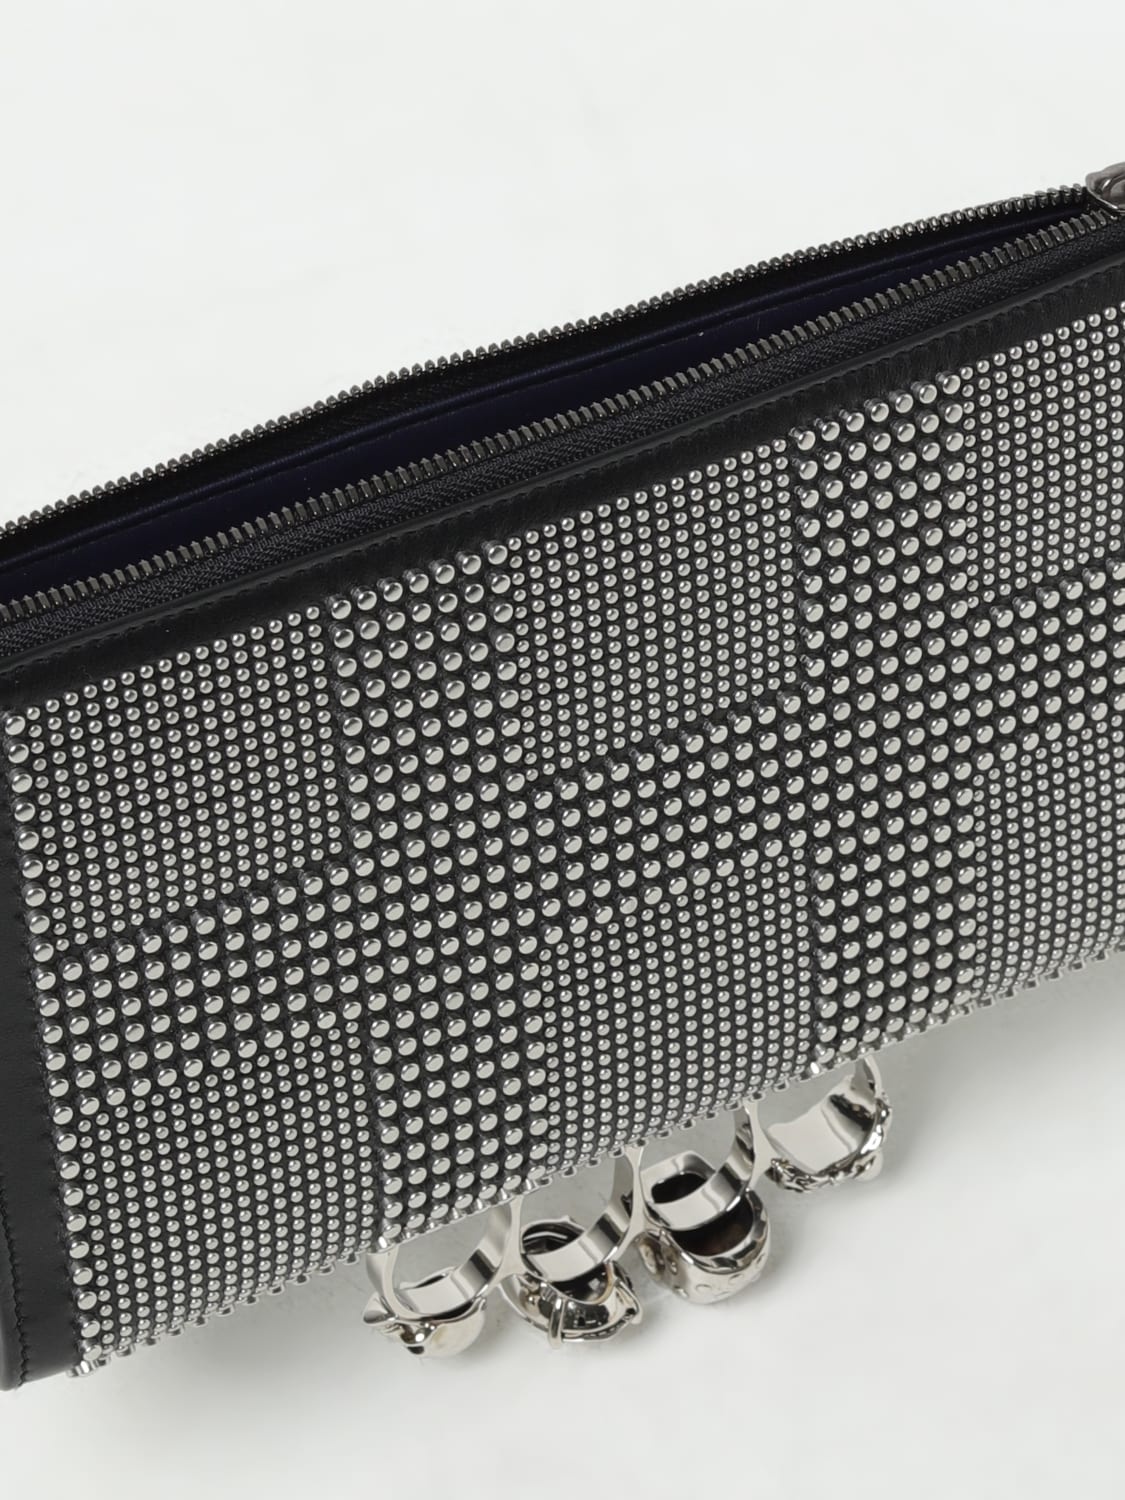 Alexander McQueen leather pouch with studs - 4